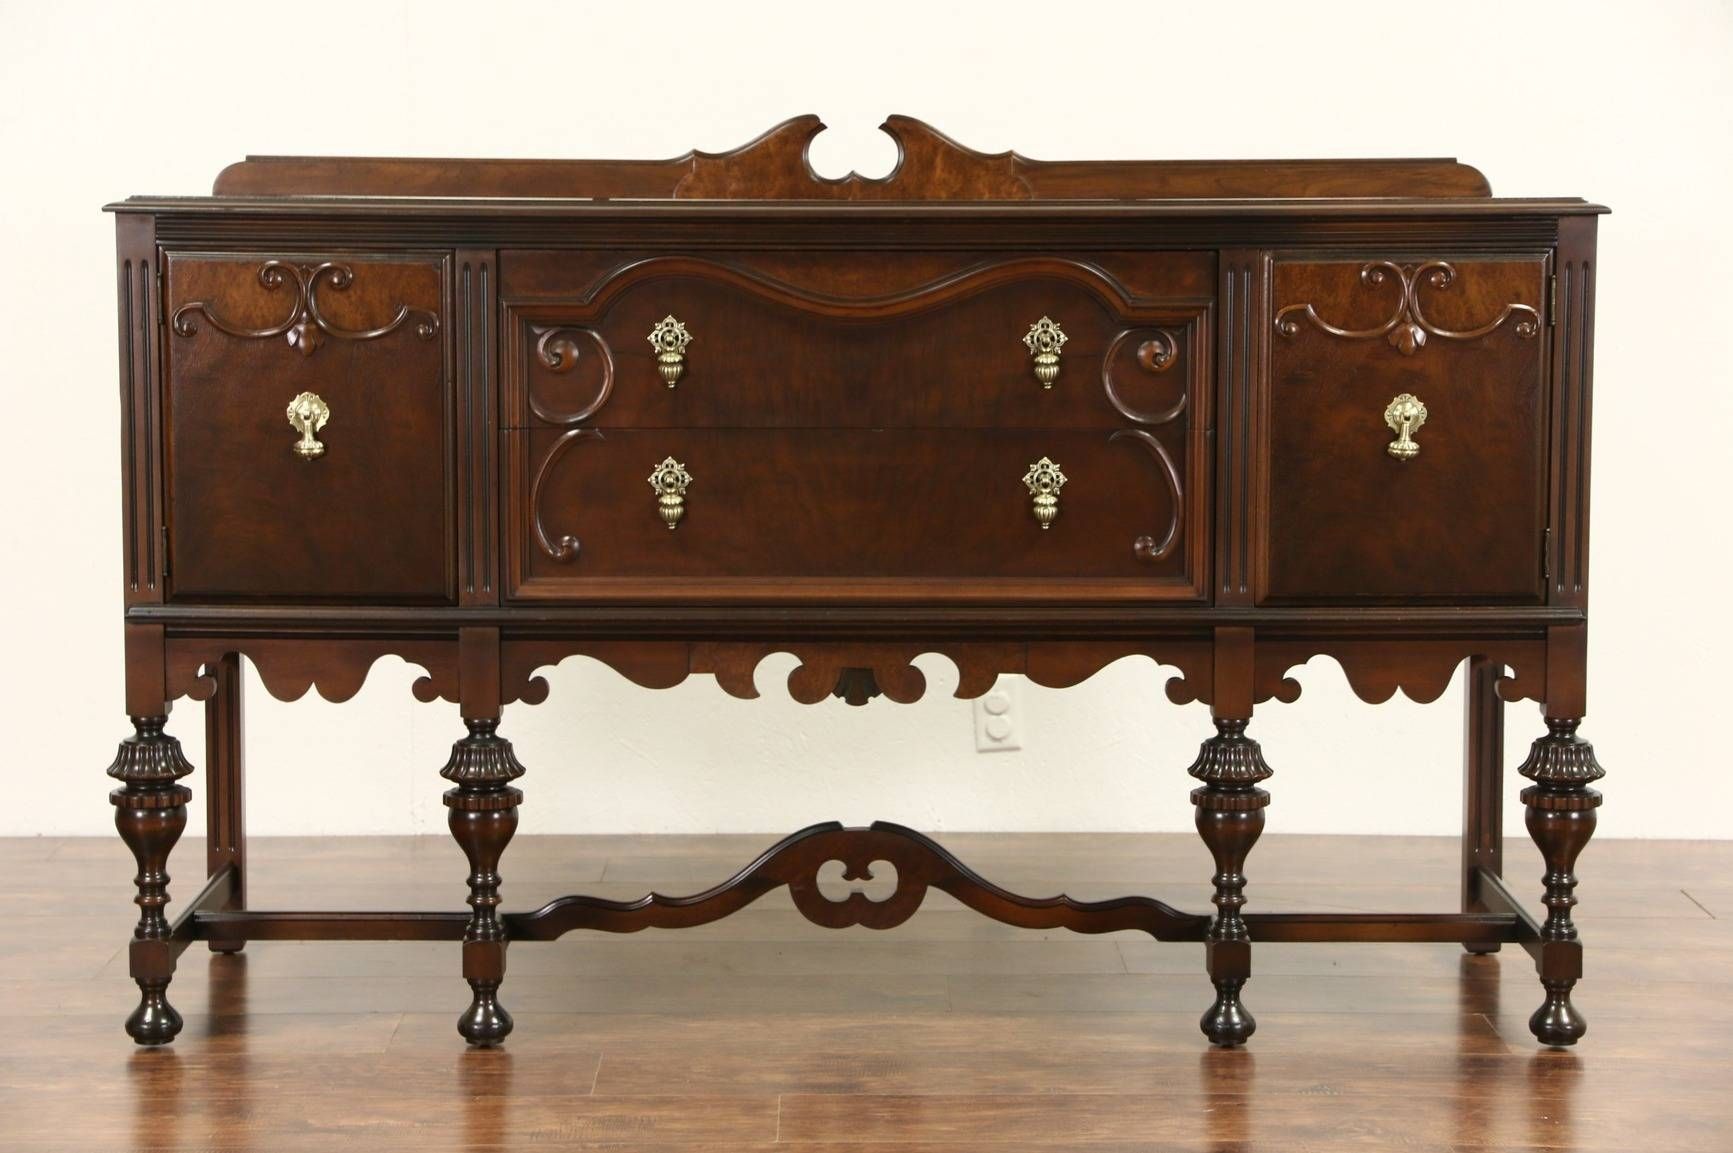 Sold – English Tudor 1920 Antique Walnut Sideboard Server Or Throughout Most Up To Date Antique Sideboard Buffets (View 7 of 15)